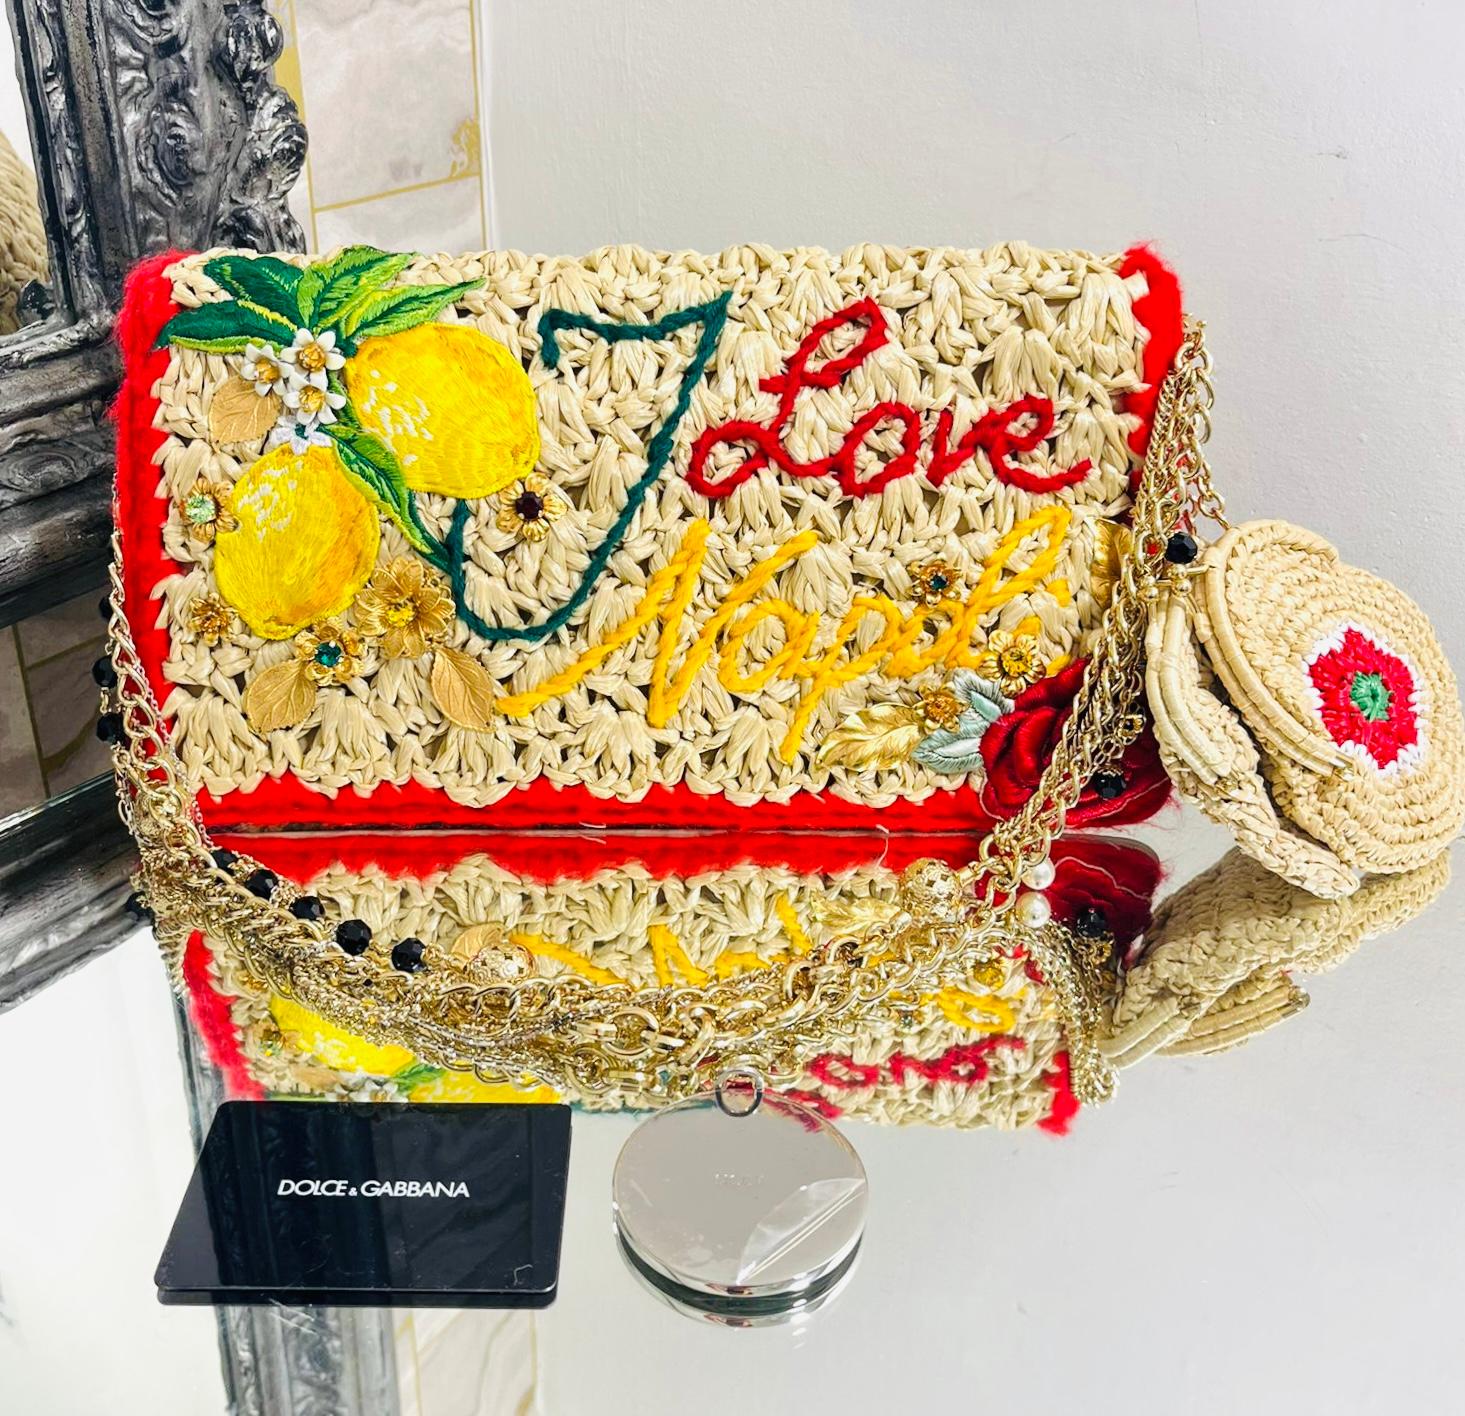 Dolce & Gabbana Rose & Lemons Richly Embellished Raffia Bag

Beige woven handbag embellished with multicoloured 'I Love Napoli' wool embroidery.

Featuring lemons and roses appliques with decorative crystals, flowers and leaves.

Detailed with gold,